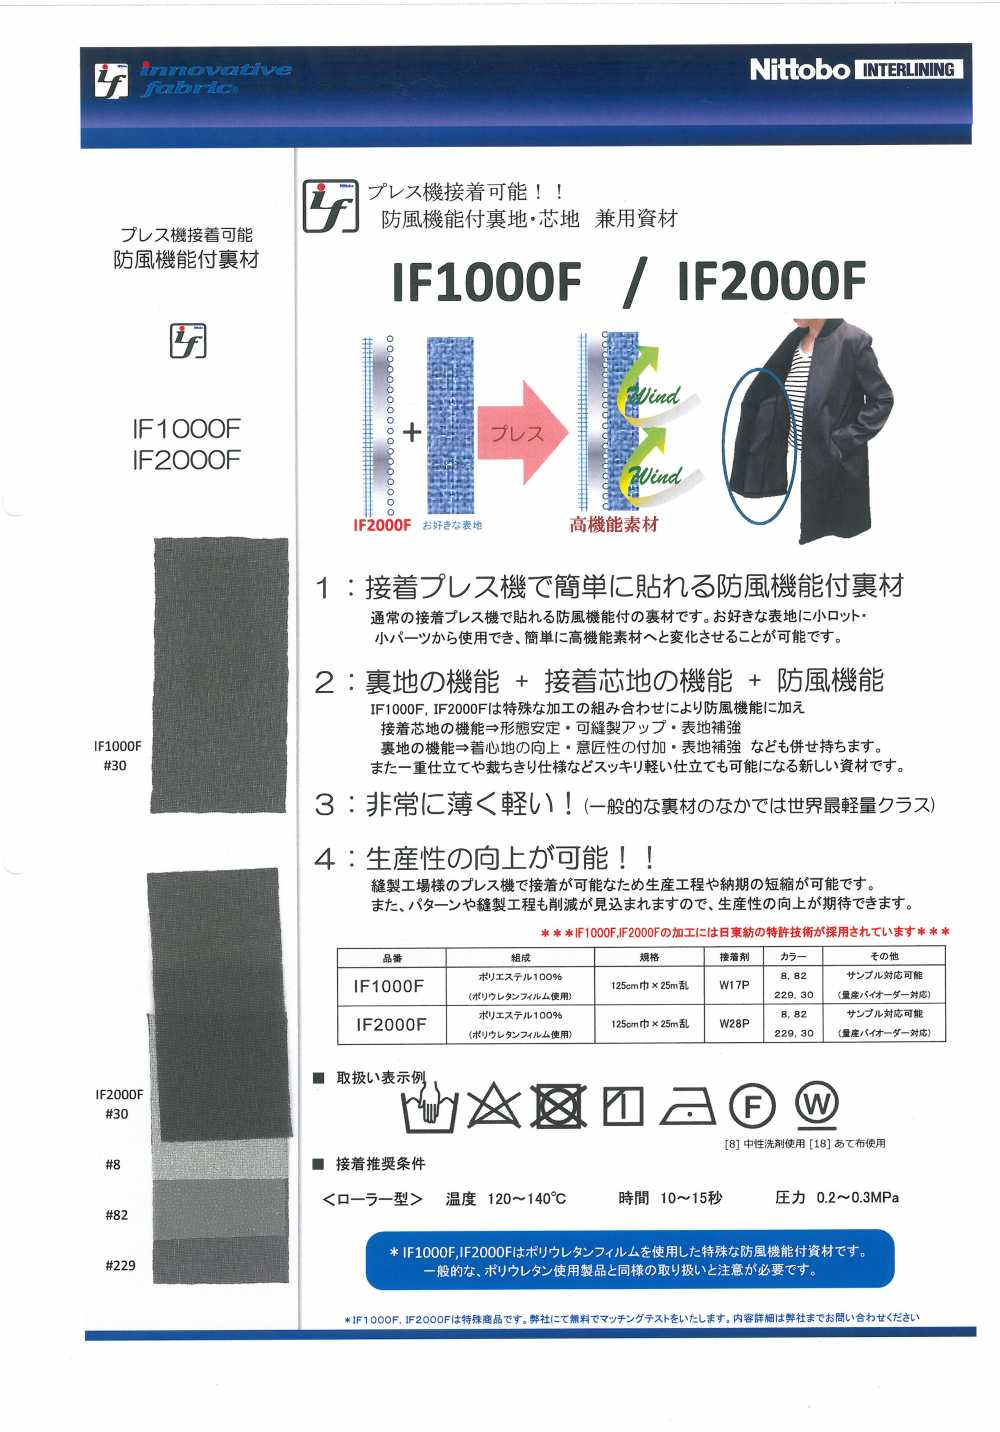 IF1000F Lining / Interlining Material With Windproof Function Nittobo